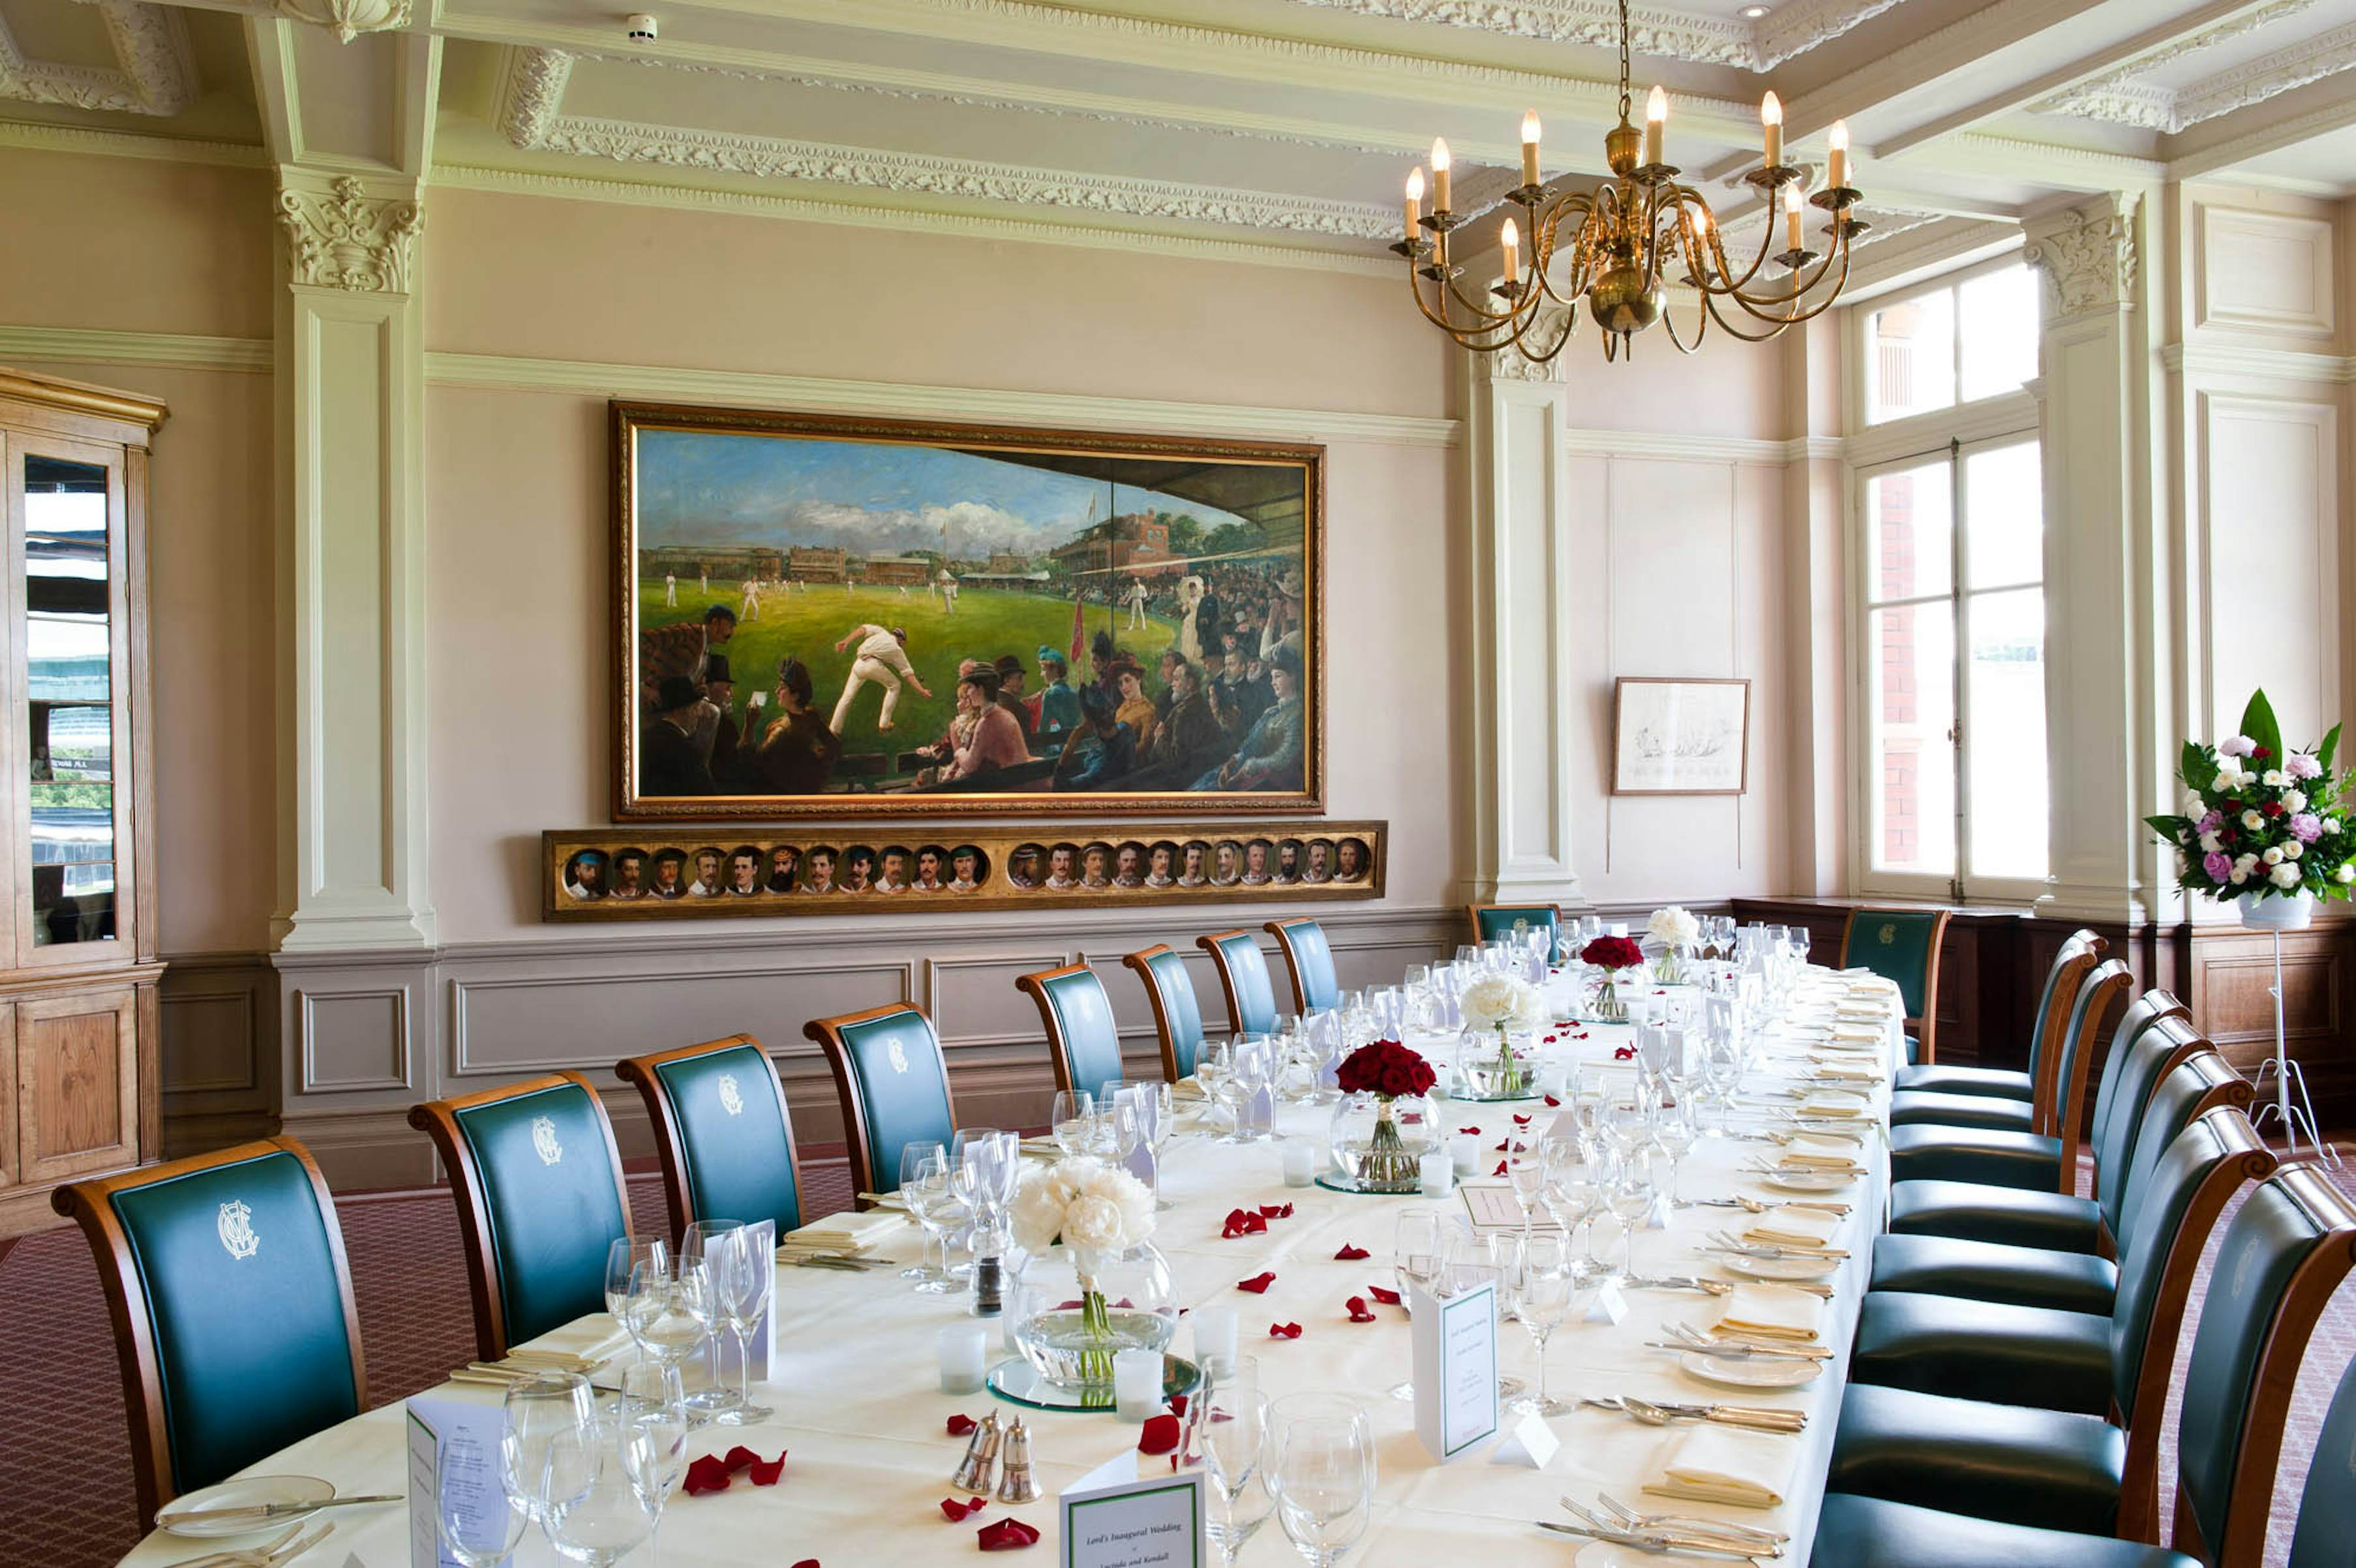 Lord's Cricket Ground - The Writing Room image 1